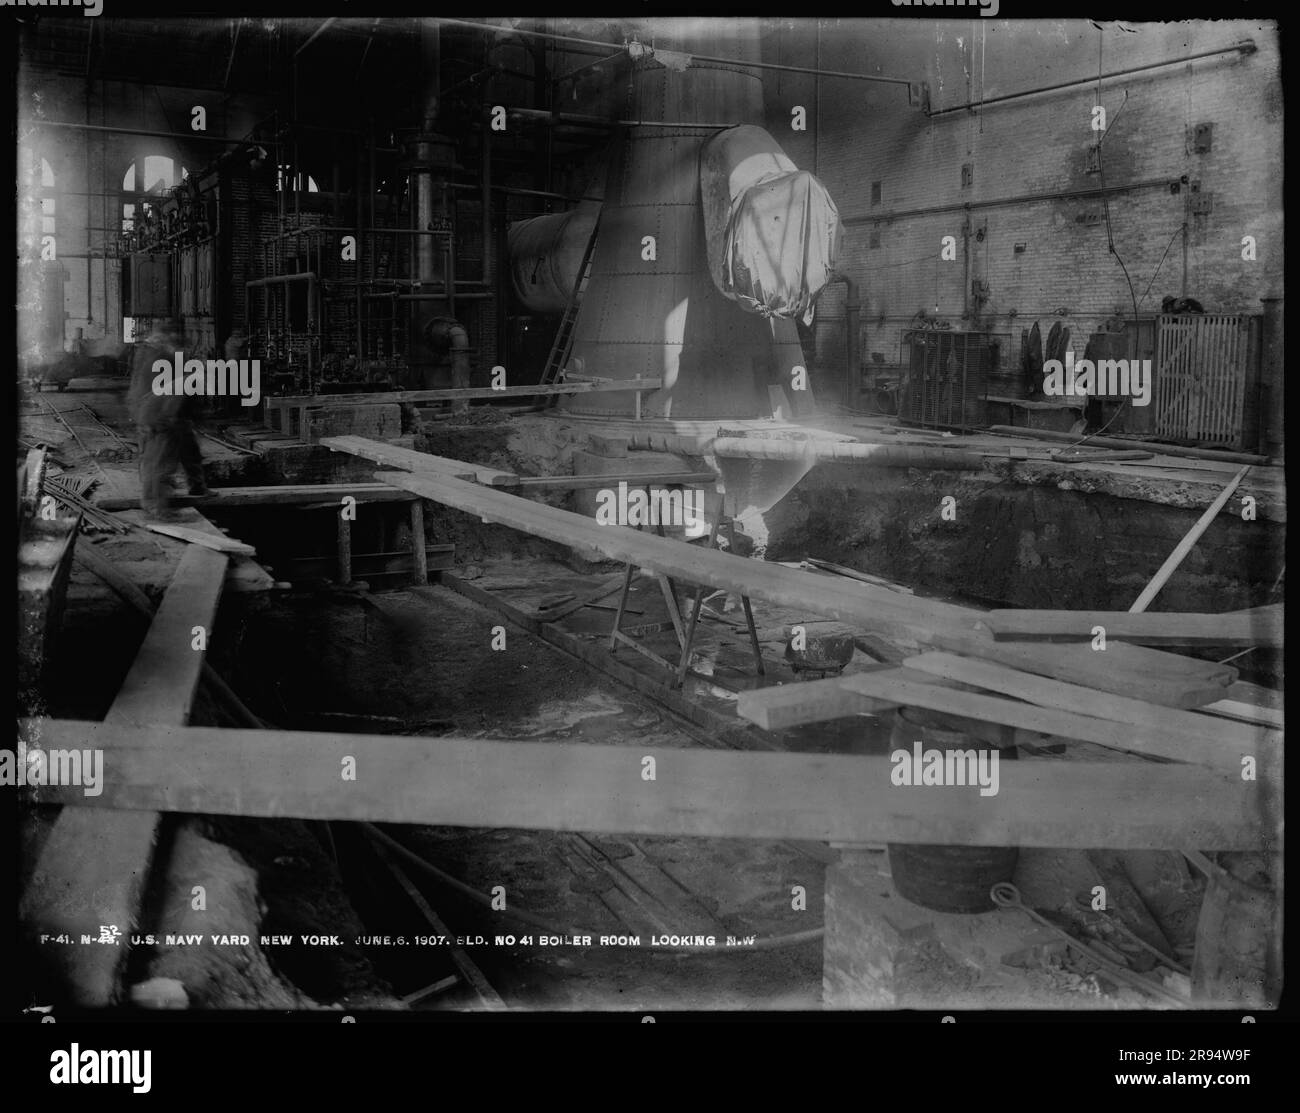 Building Number 41, Boiler Room, Looking Northwest. Glass Plate Negatives of the Construction and Repair of Buildings, Facilities, and Vessels at the New York Navy Yard. Stock Photo